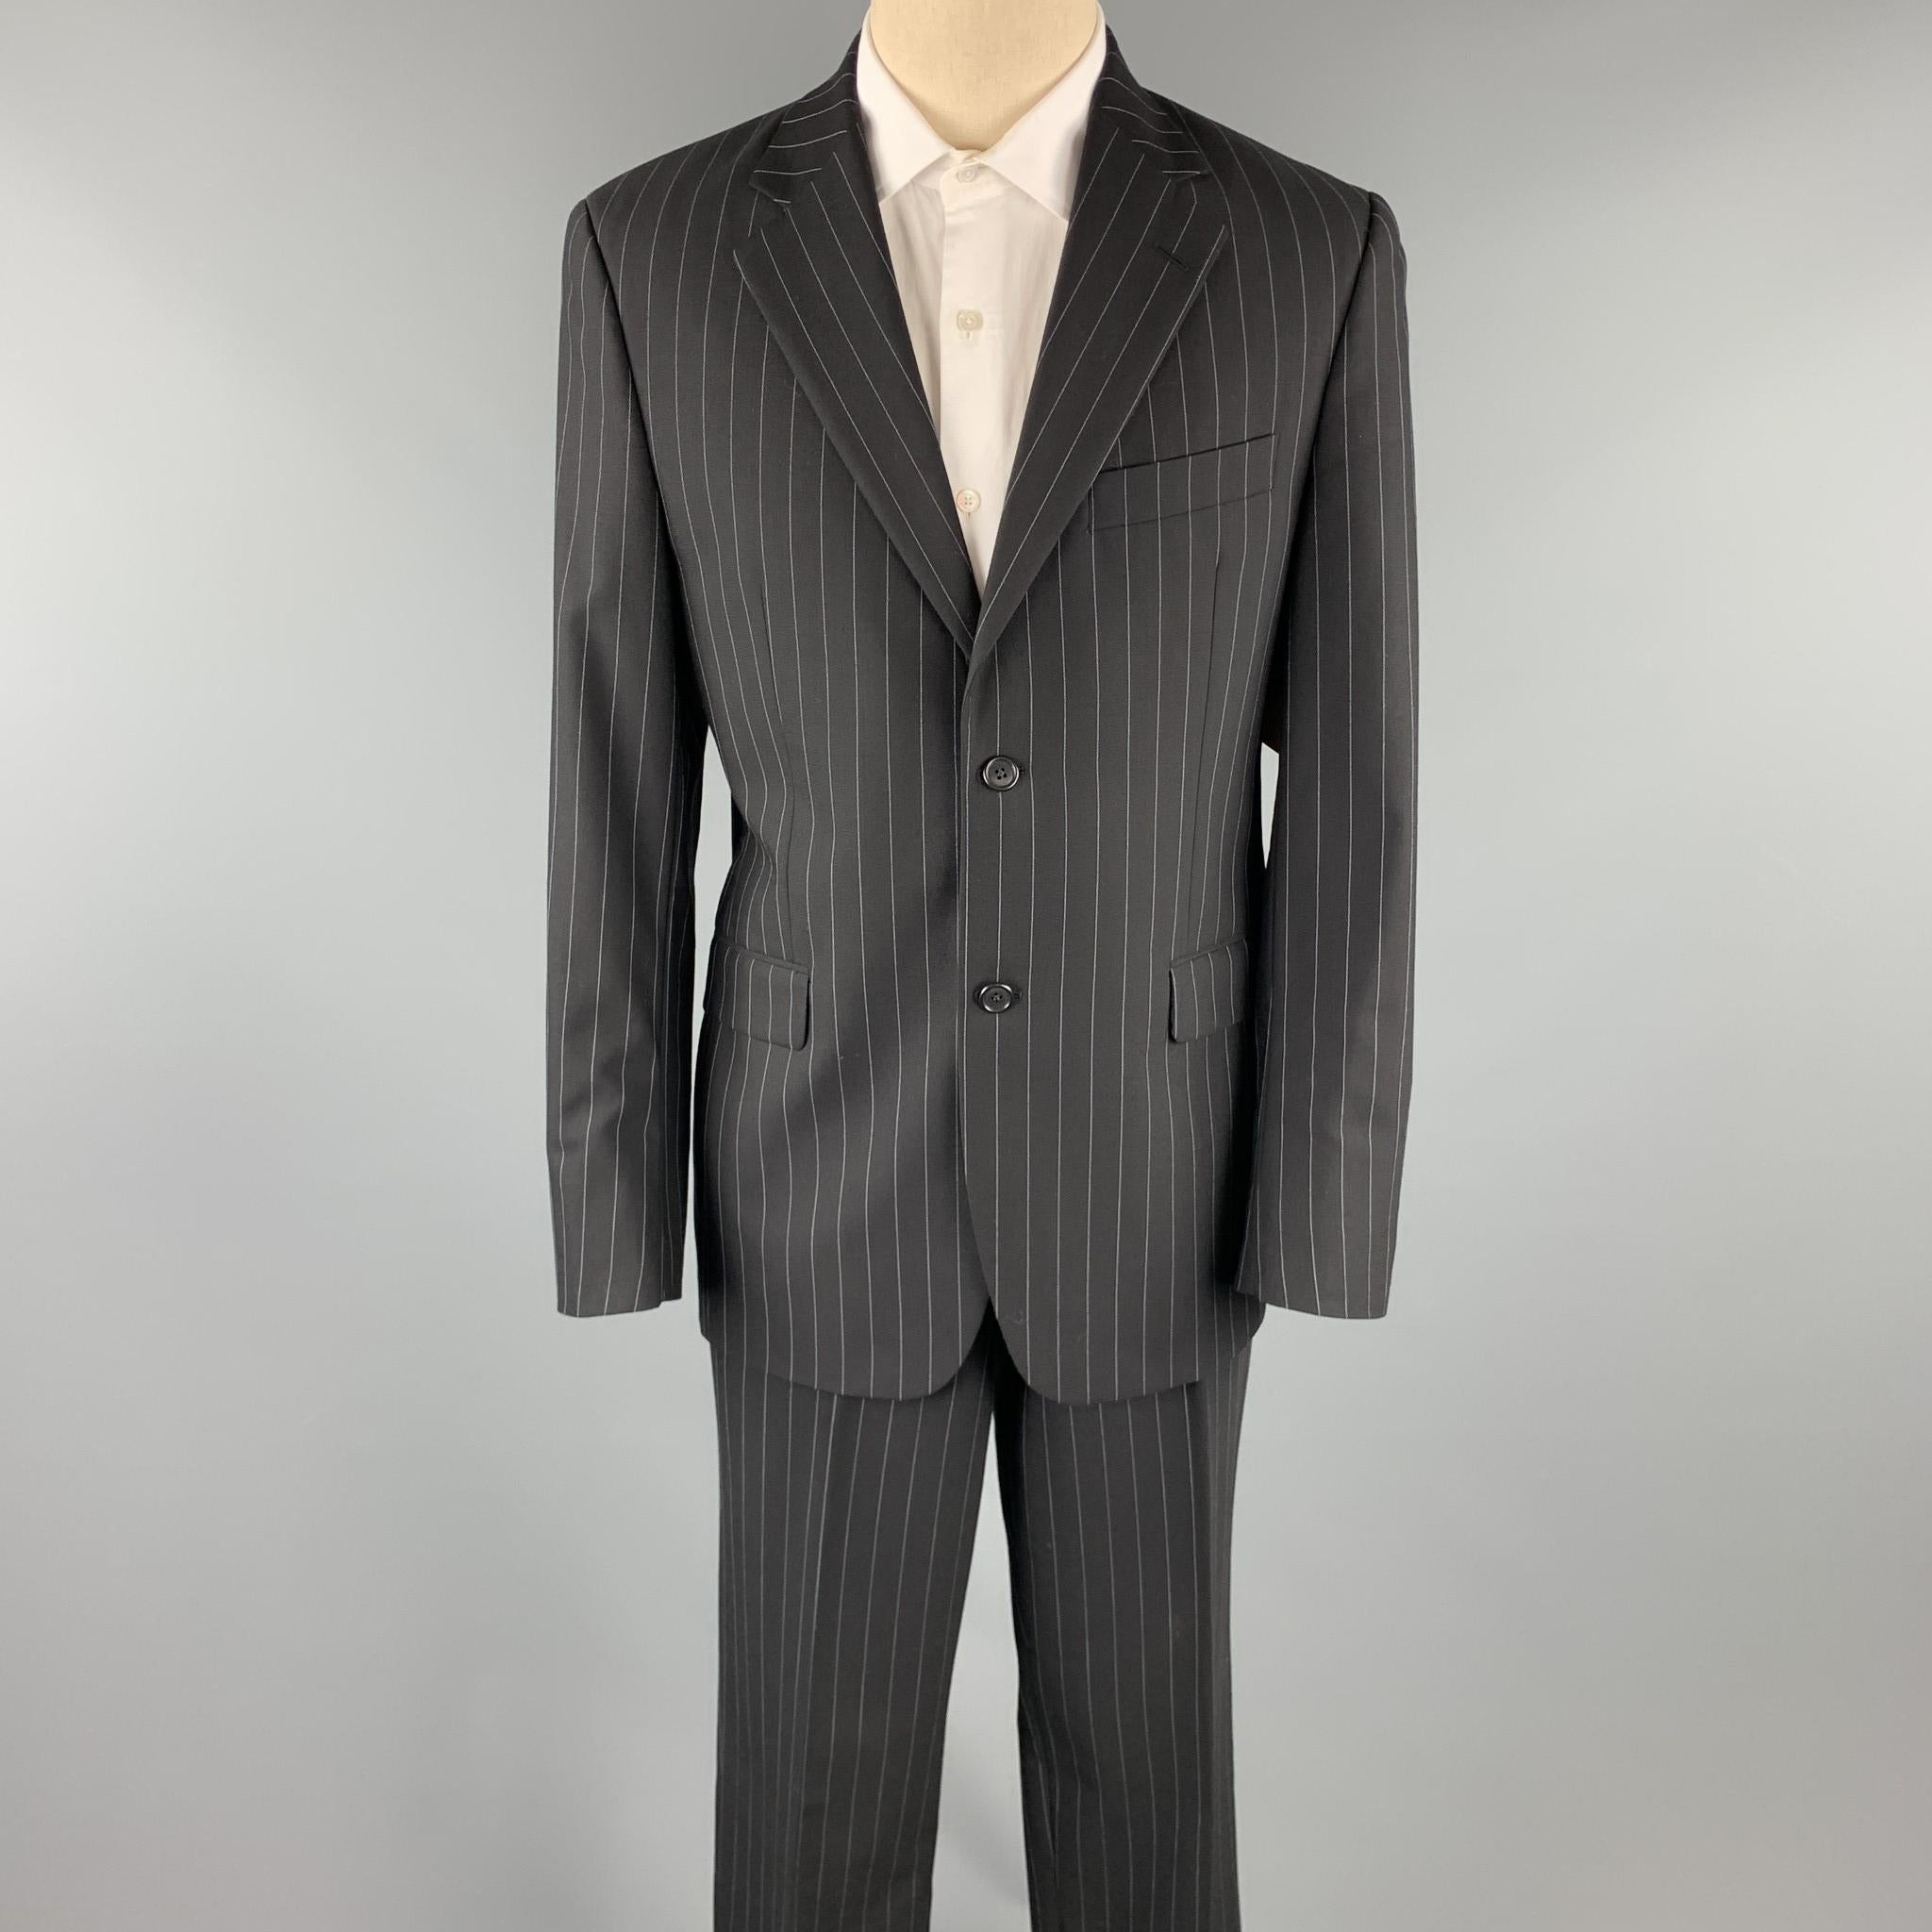 JOHN BARTLETT suit comes in a black chalk stripe wool and includes a single breasted, two button sport coat with a notch lapel and matching flat front trousers. 

Excellent Pre-Owned Condition.
Marked: 40 R

Measurements:

-Jacket
Shoulder: 18 in.